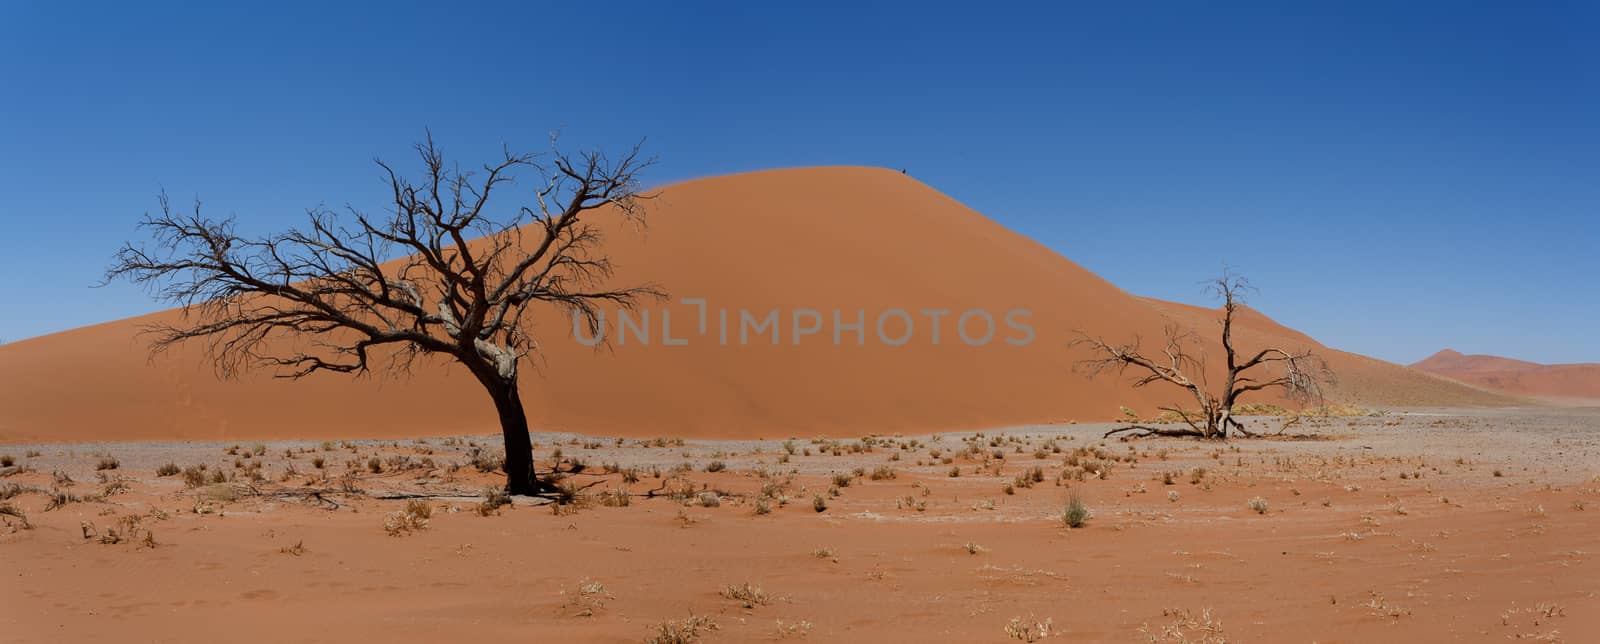 Dune 45 in sossusvlei Namibia with dead tree, best of Namibia landscape, Dune 45 is the biggest dune in the world